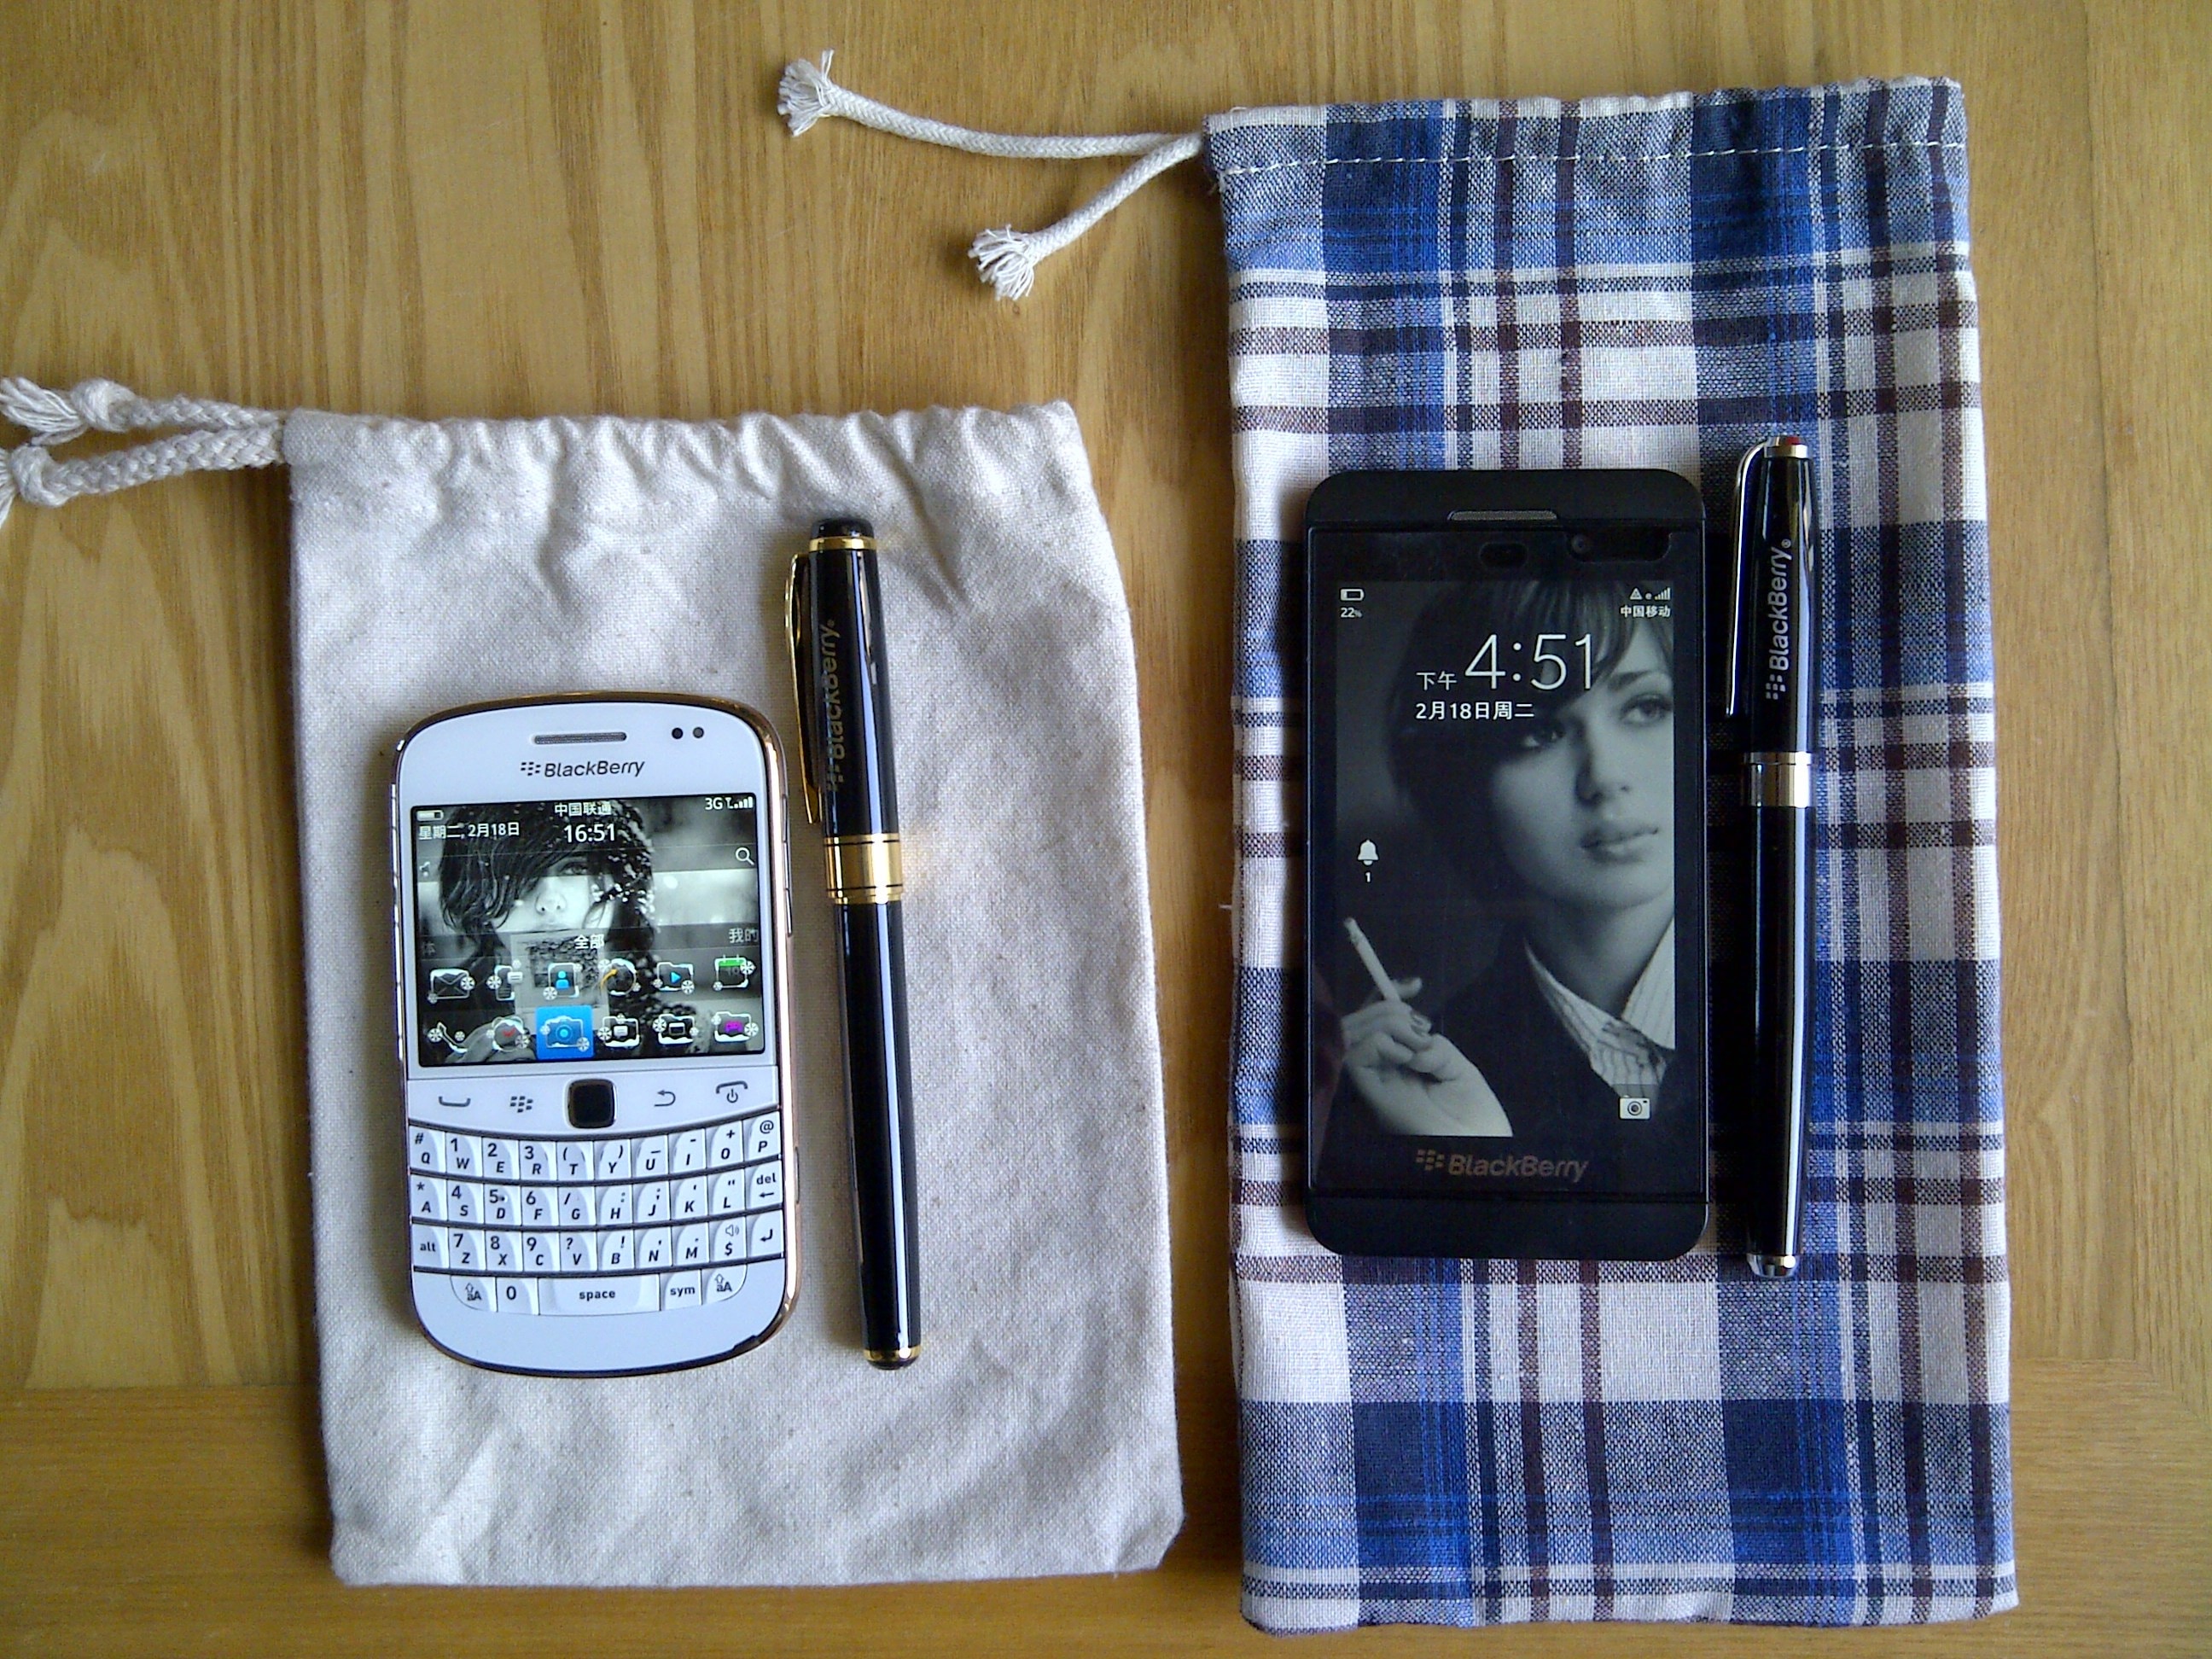 white blackberry qwerty phone and black berry smartphone